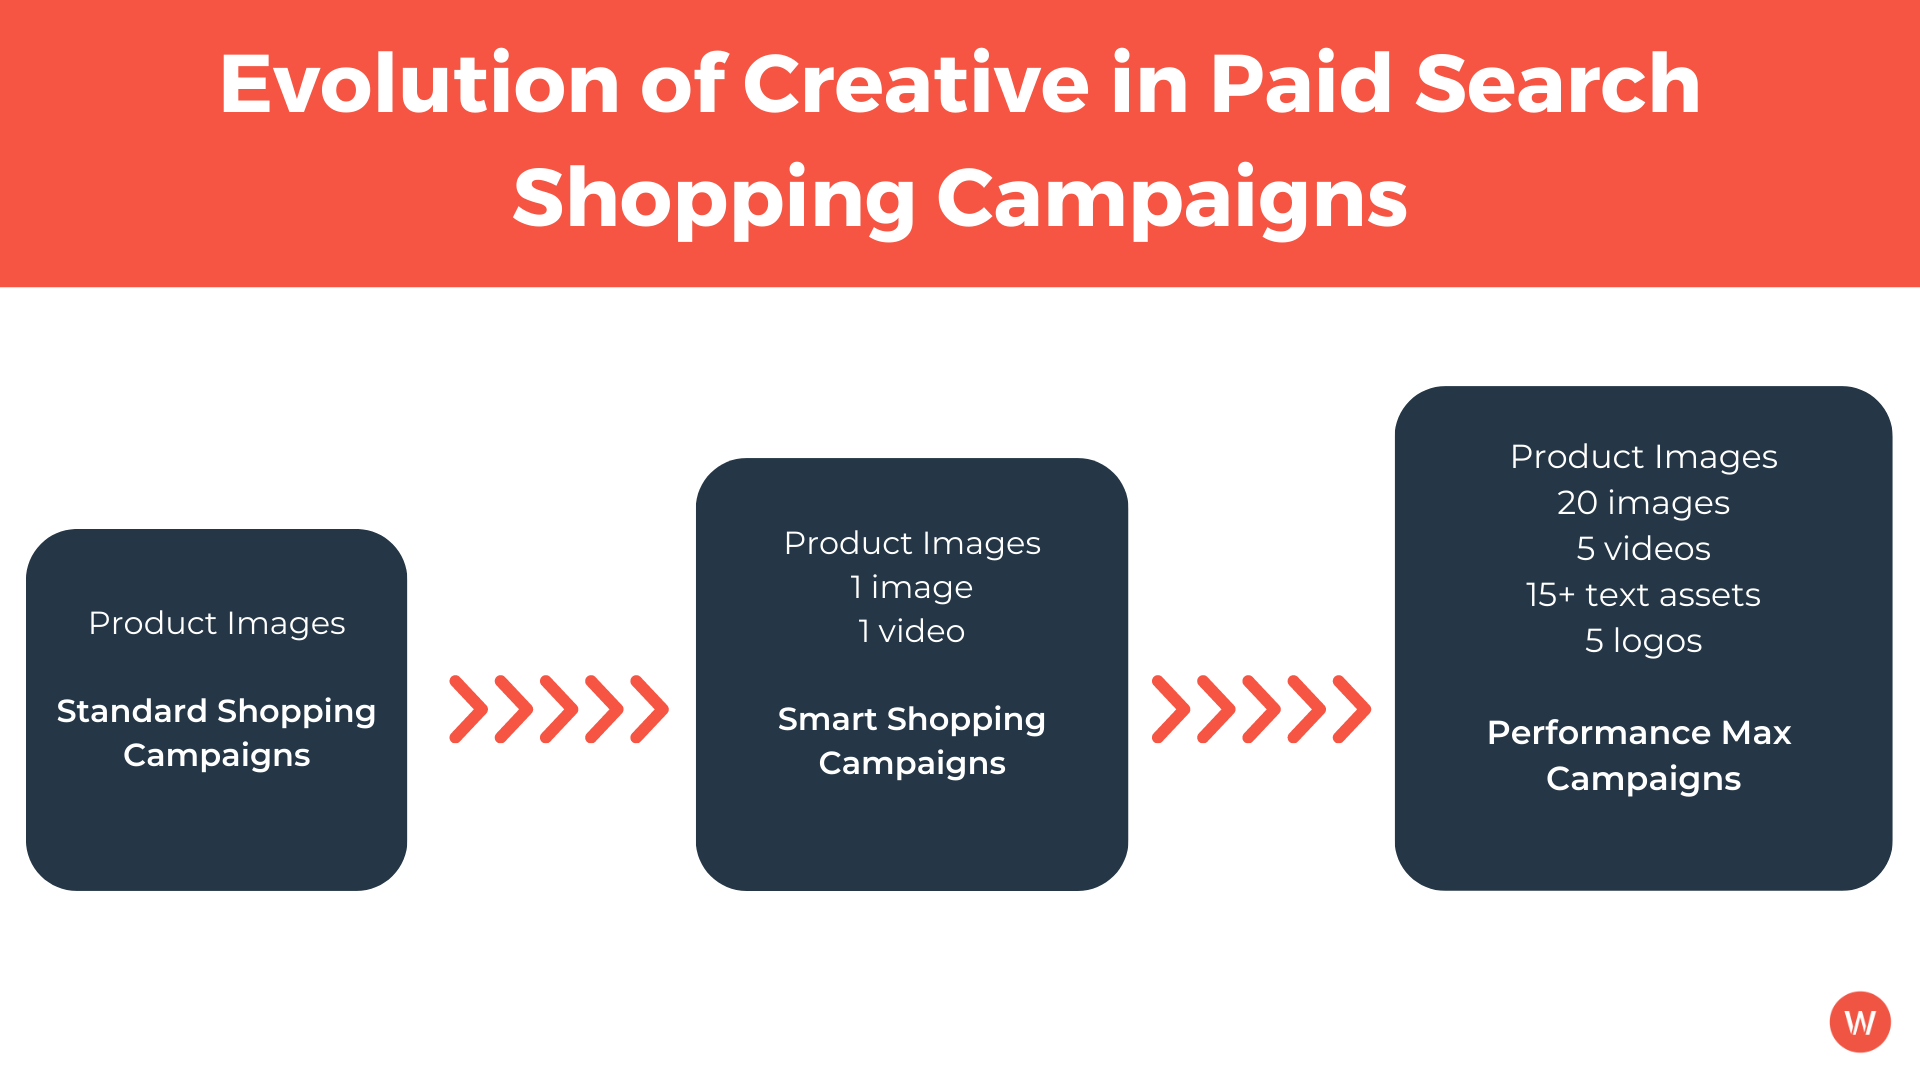 Evolution of creative in paid shopping campaigns